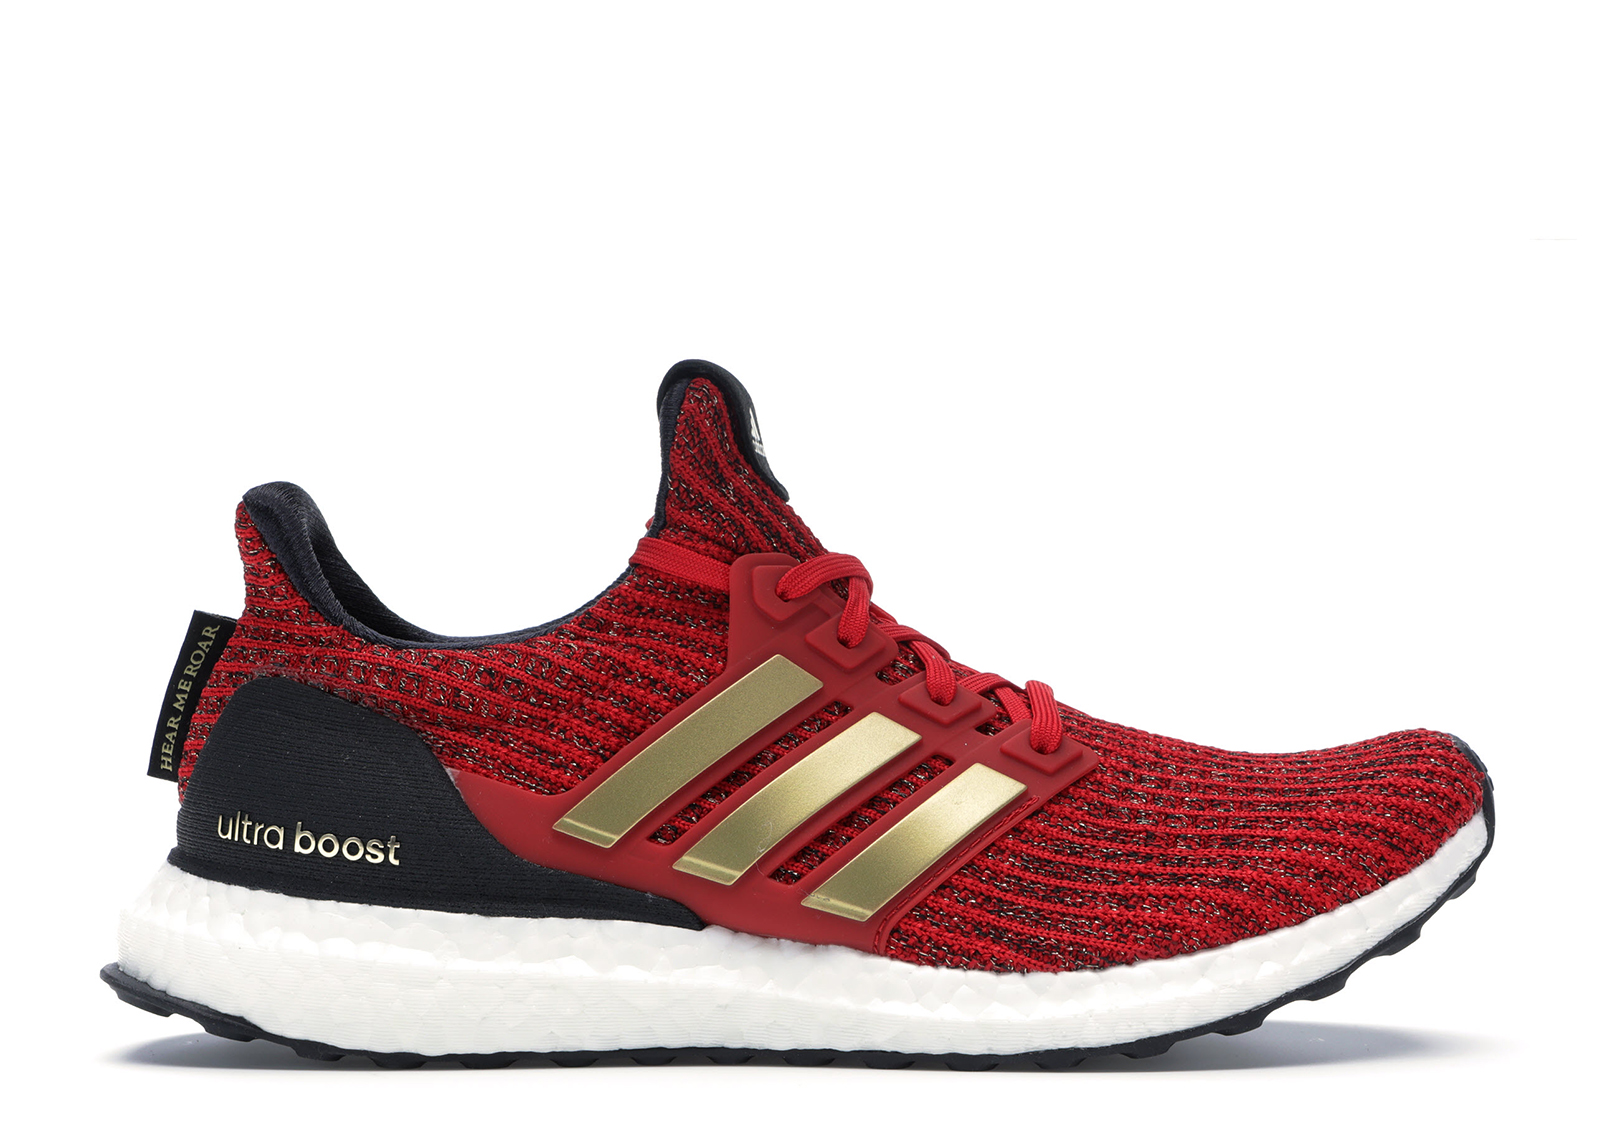 adidas Ultra Boost 4.0 Game of Thrones 